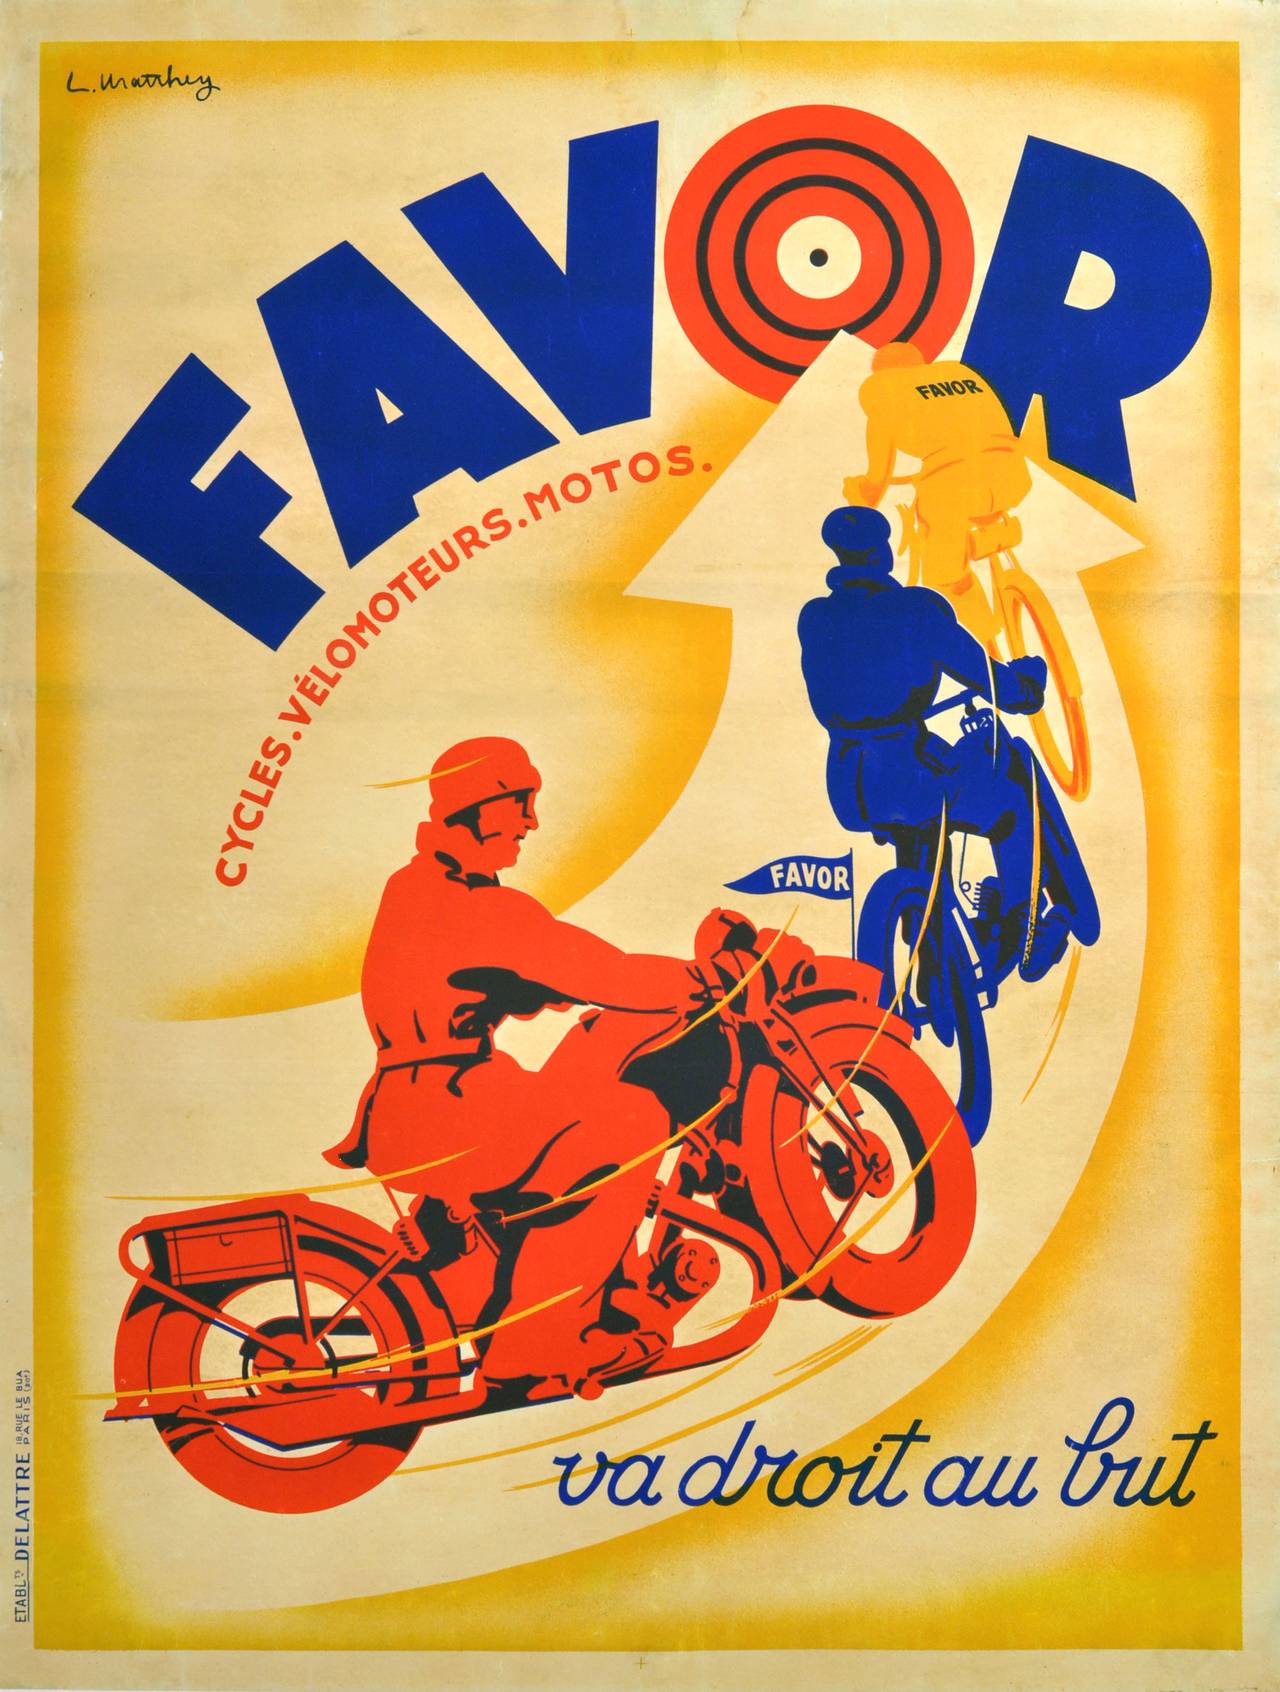 Art Deco Poster Favor Motorcycles Cycles France 1920s - Print by Unknown